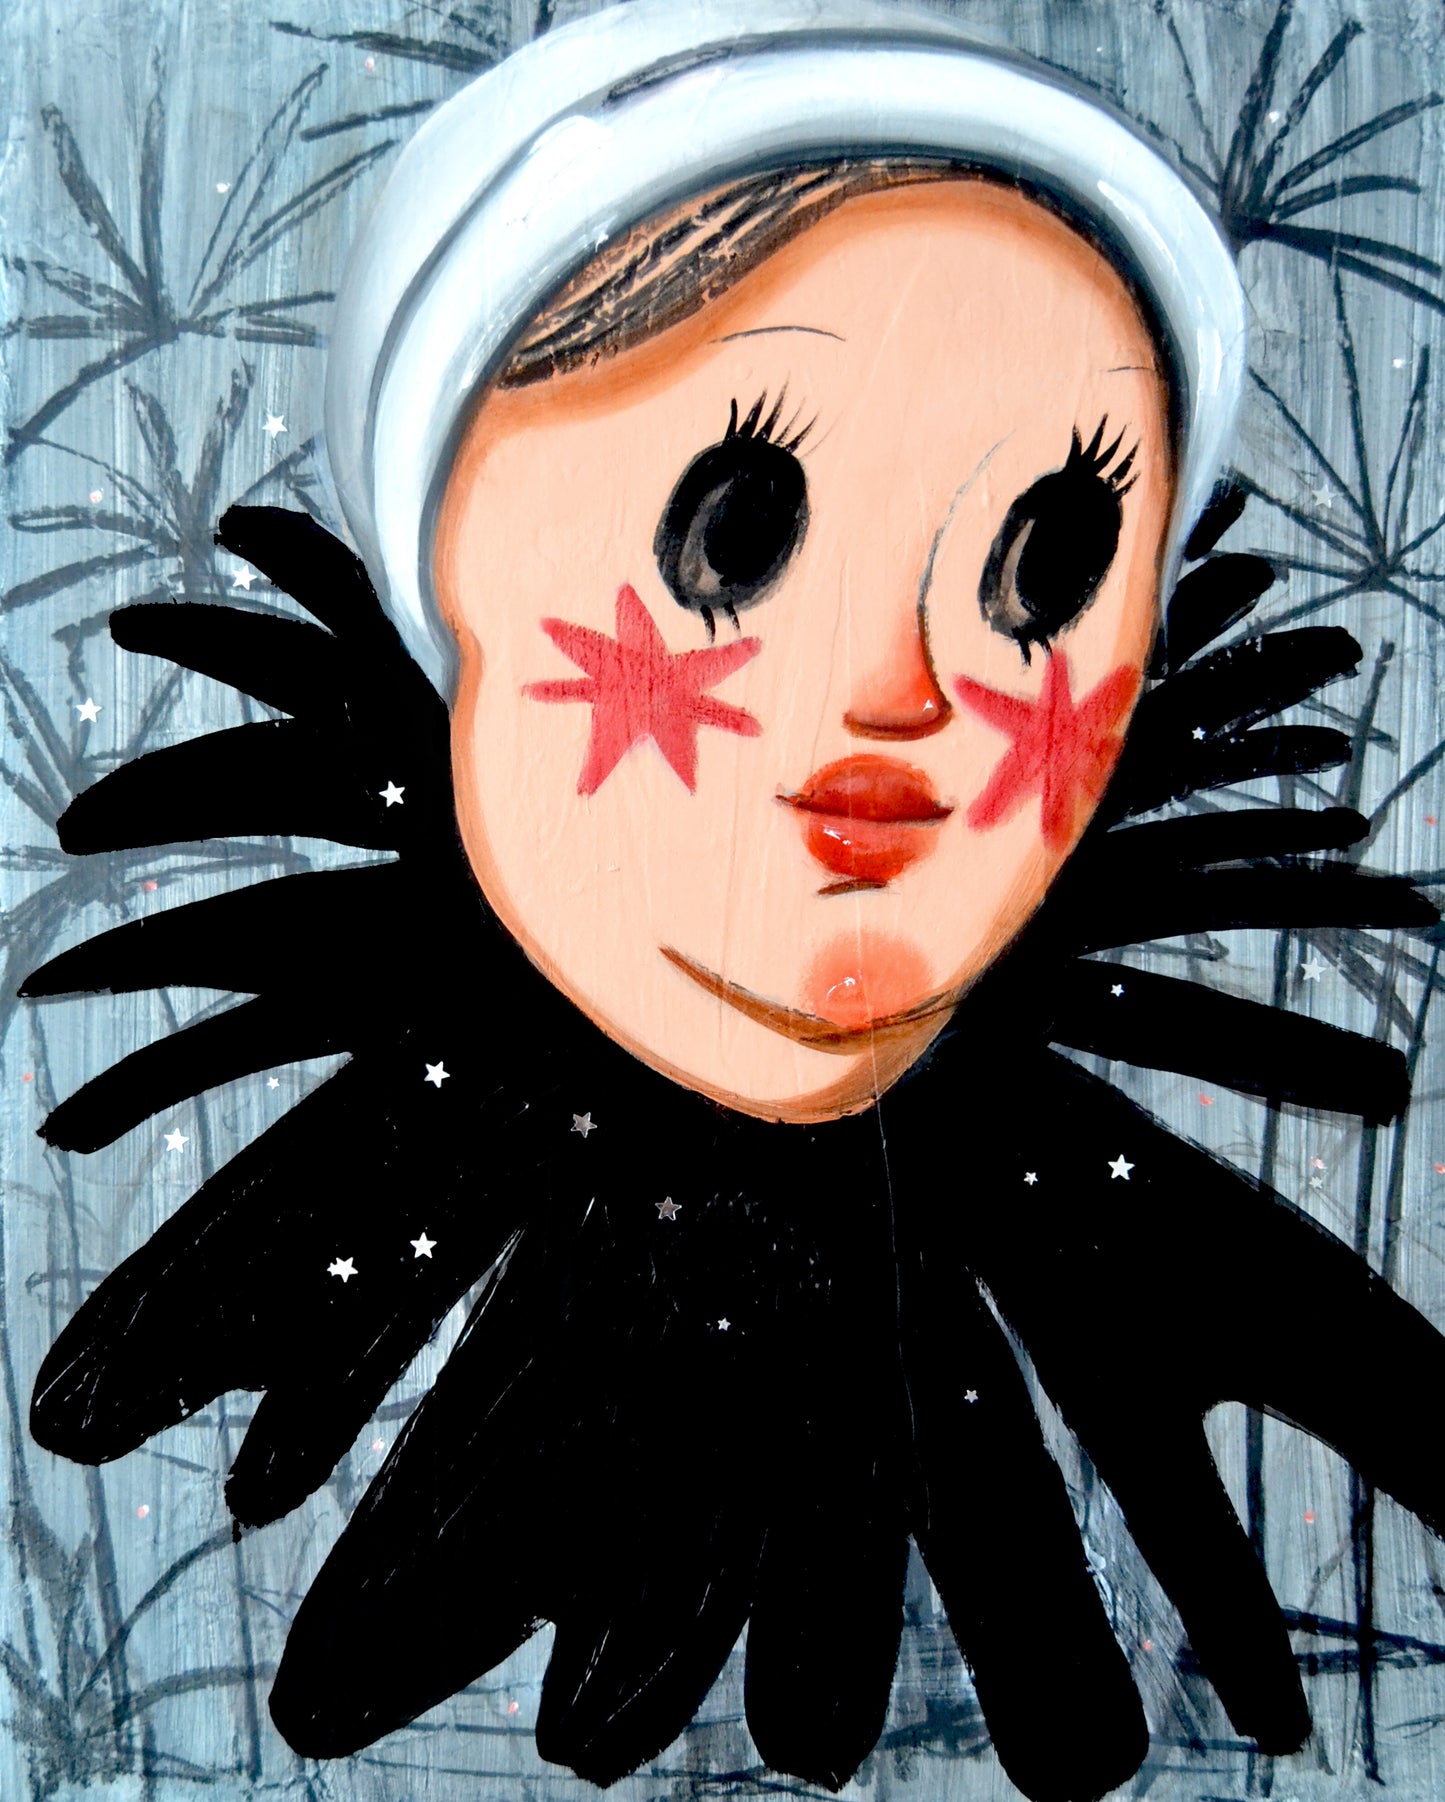 Girl Pierrot with black eyes. Original painting available in the art shop by Yana Medow artist.